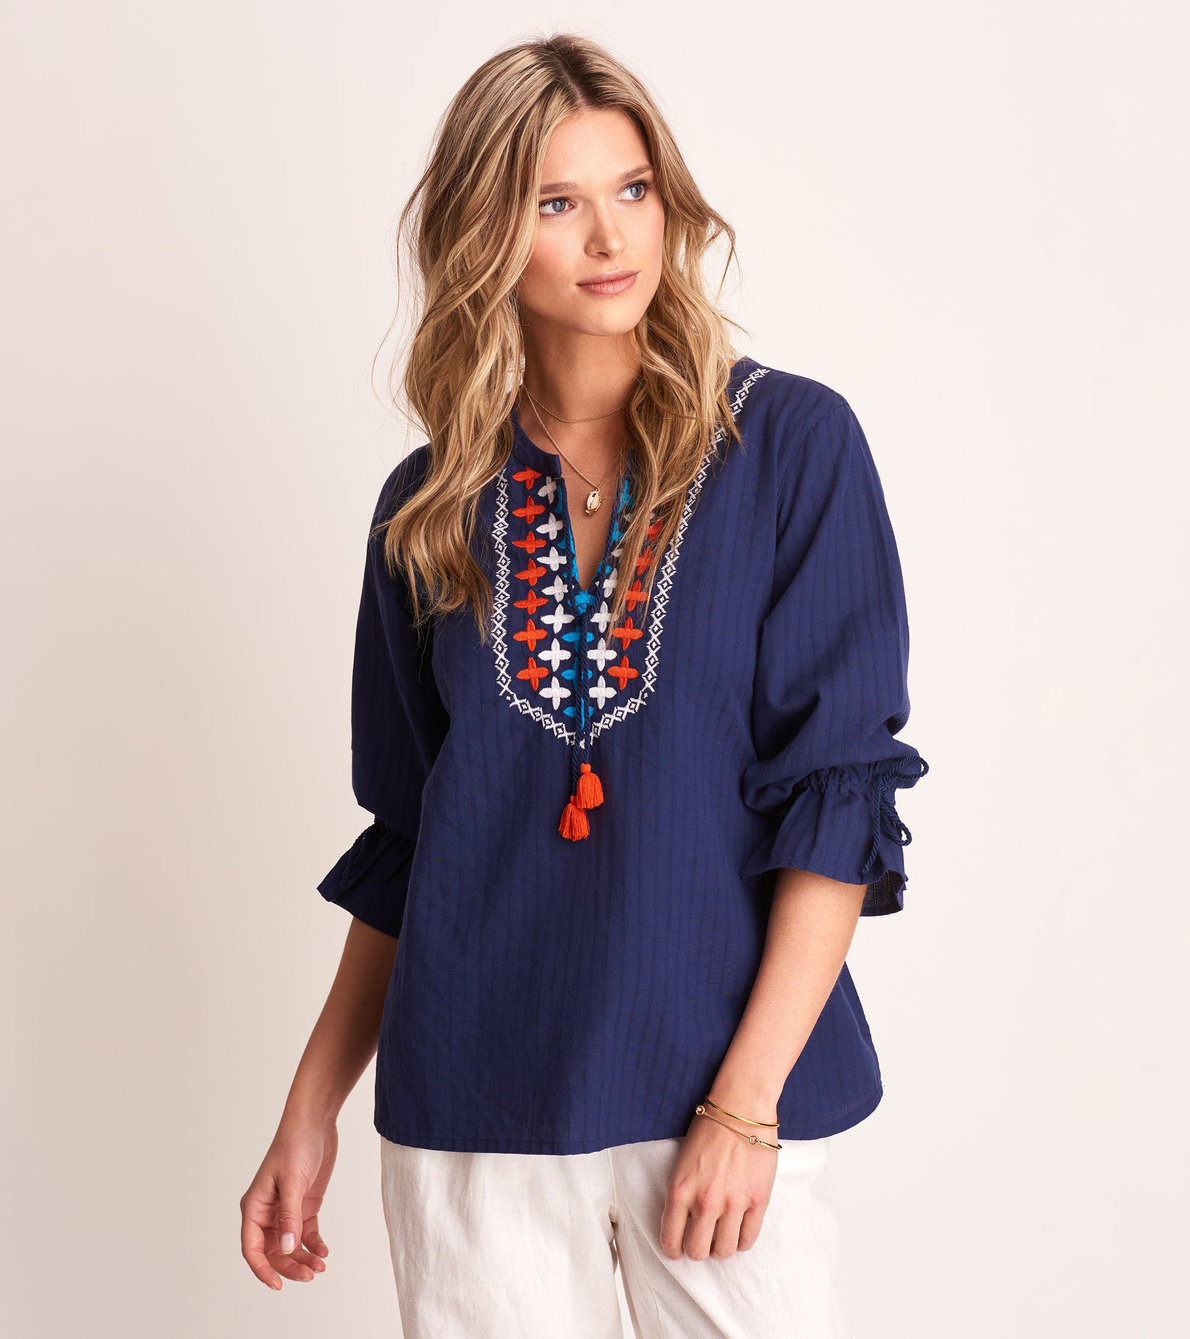 View larger image of Camila Blouse - Patriot Blue